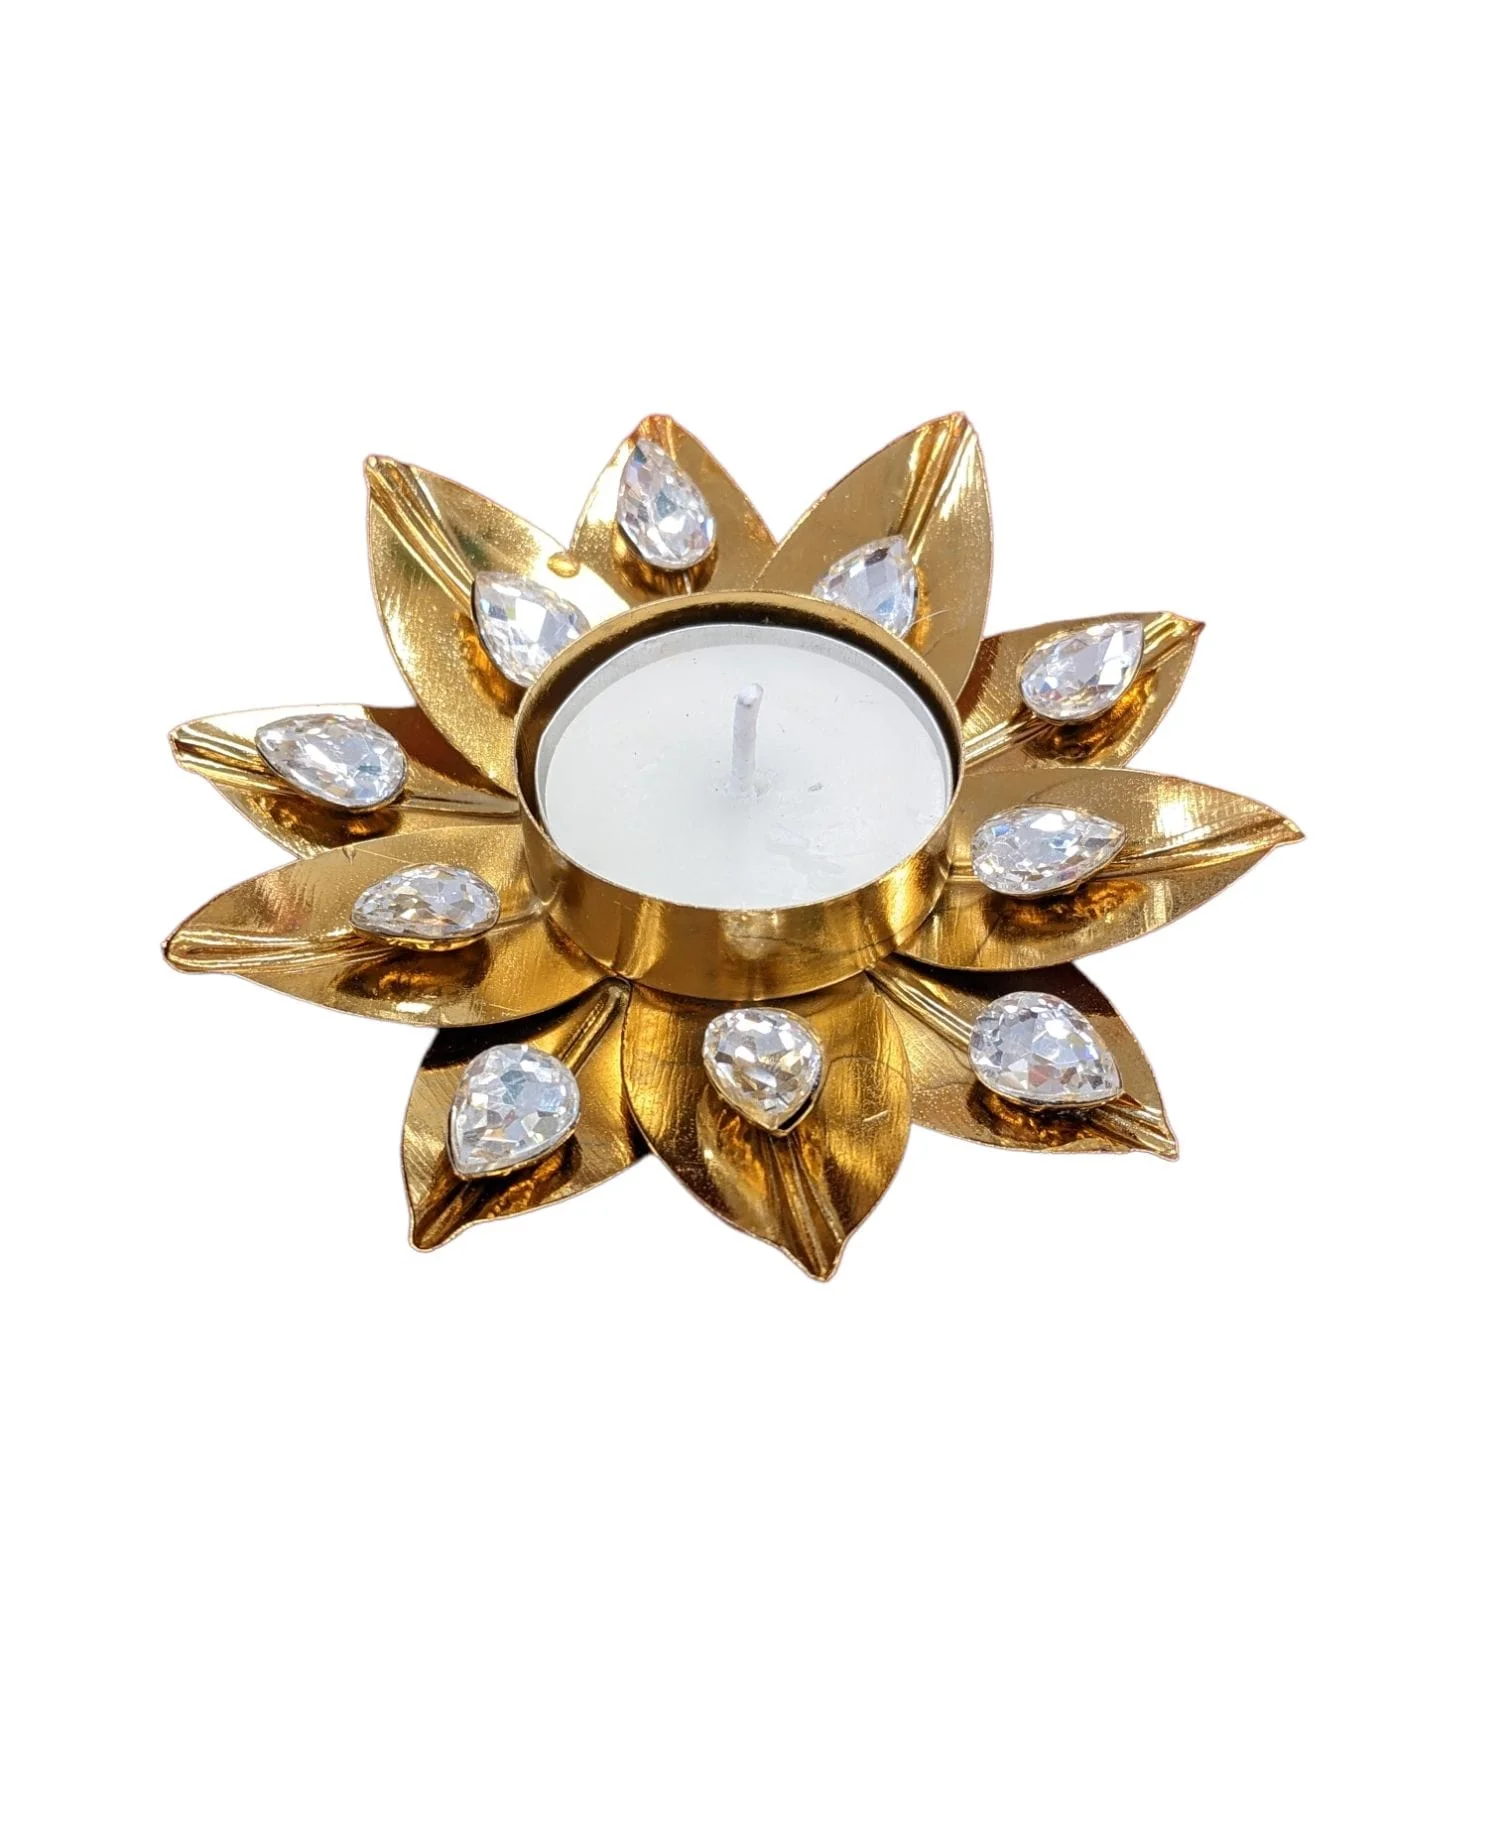 Decorative fancy diya - tealight holder for Diwali in Canada and the US